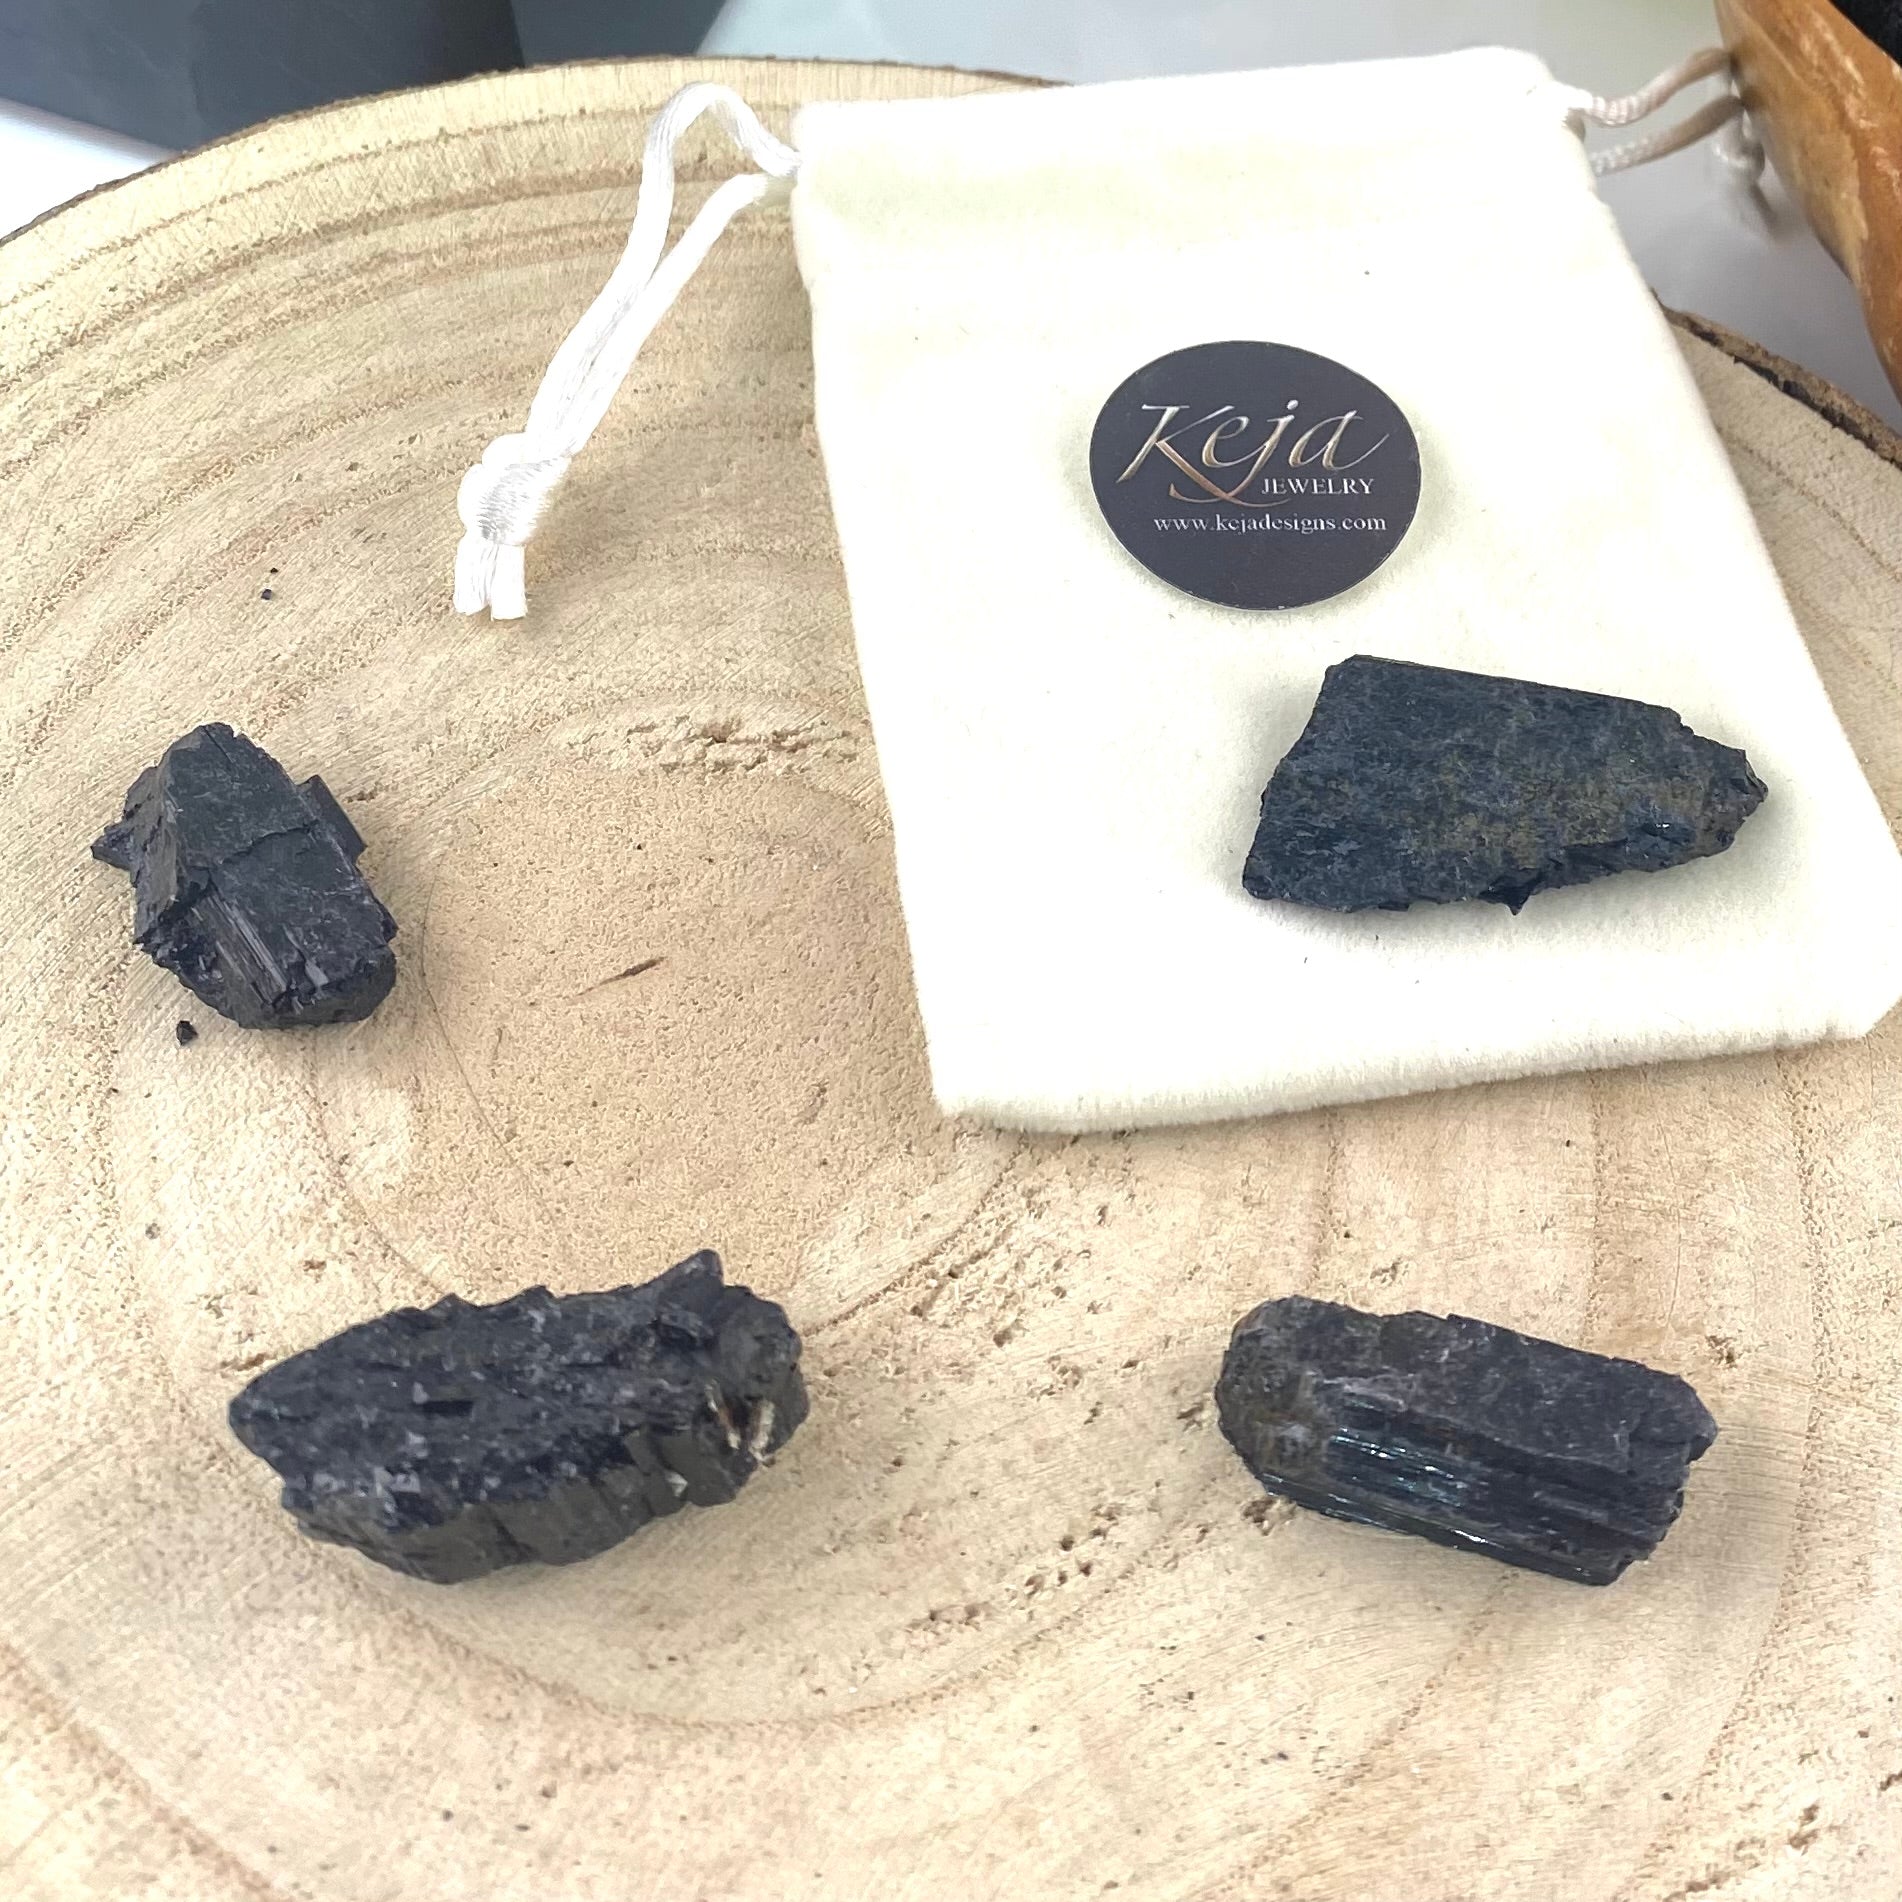 Black Tourmaline Rough Chunk Stones, Choose Quantity, Choose Size, Raw Tourmaline for Décor or Crystal Grids - Keja Designs Jewelry